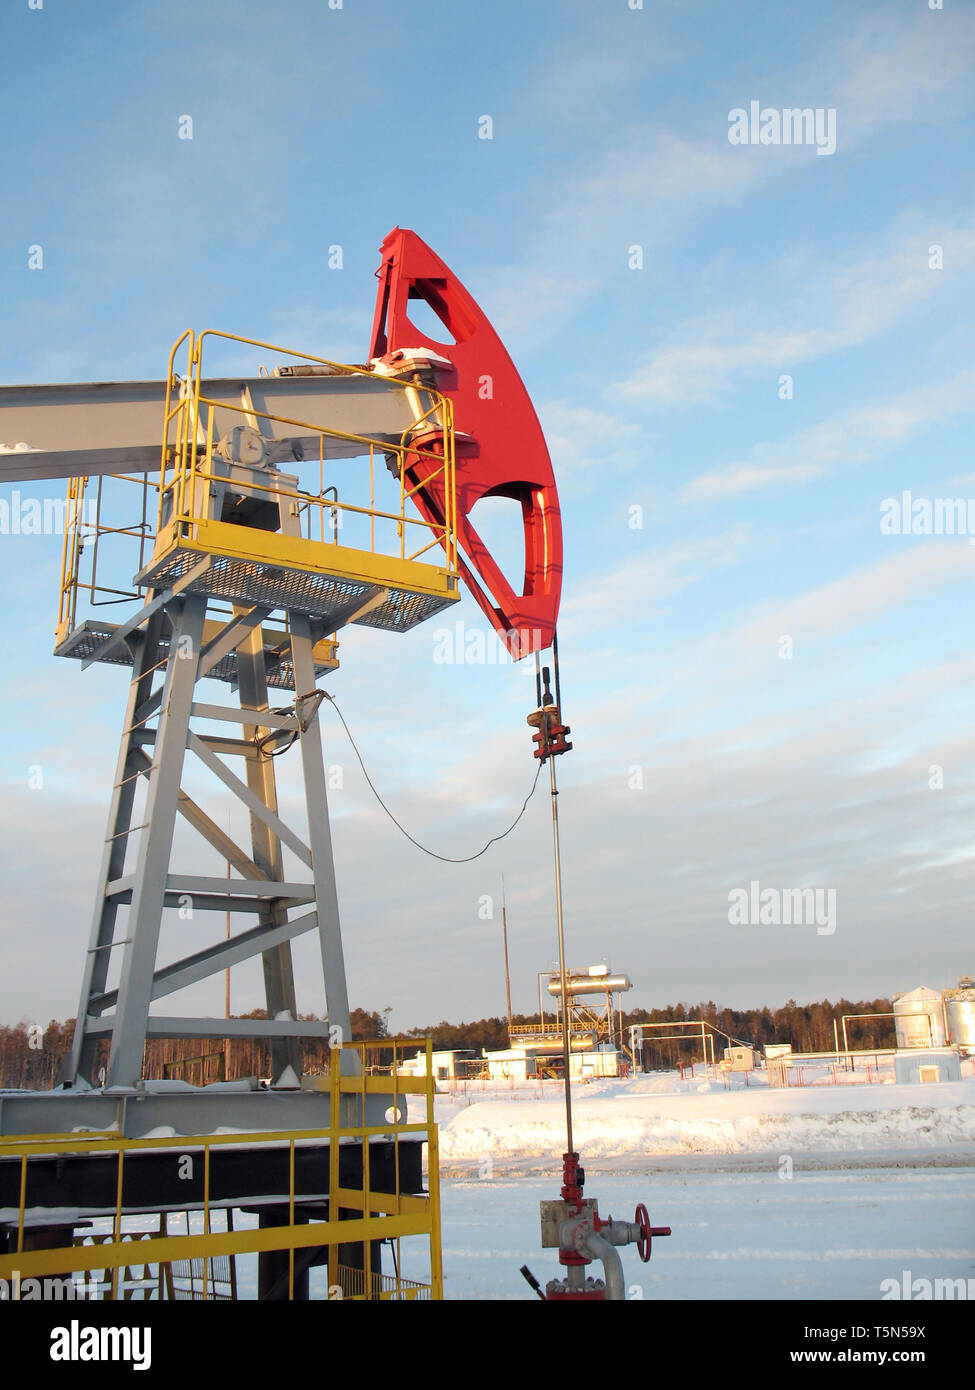 Industrial construction and mechanism. Work of oil industry Stock Photo